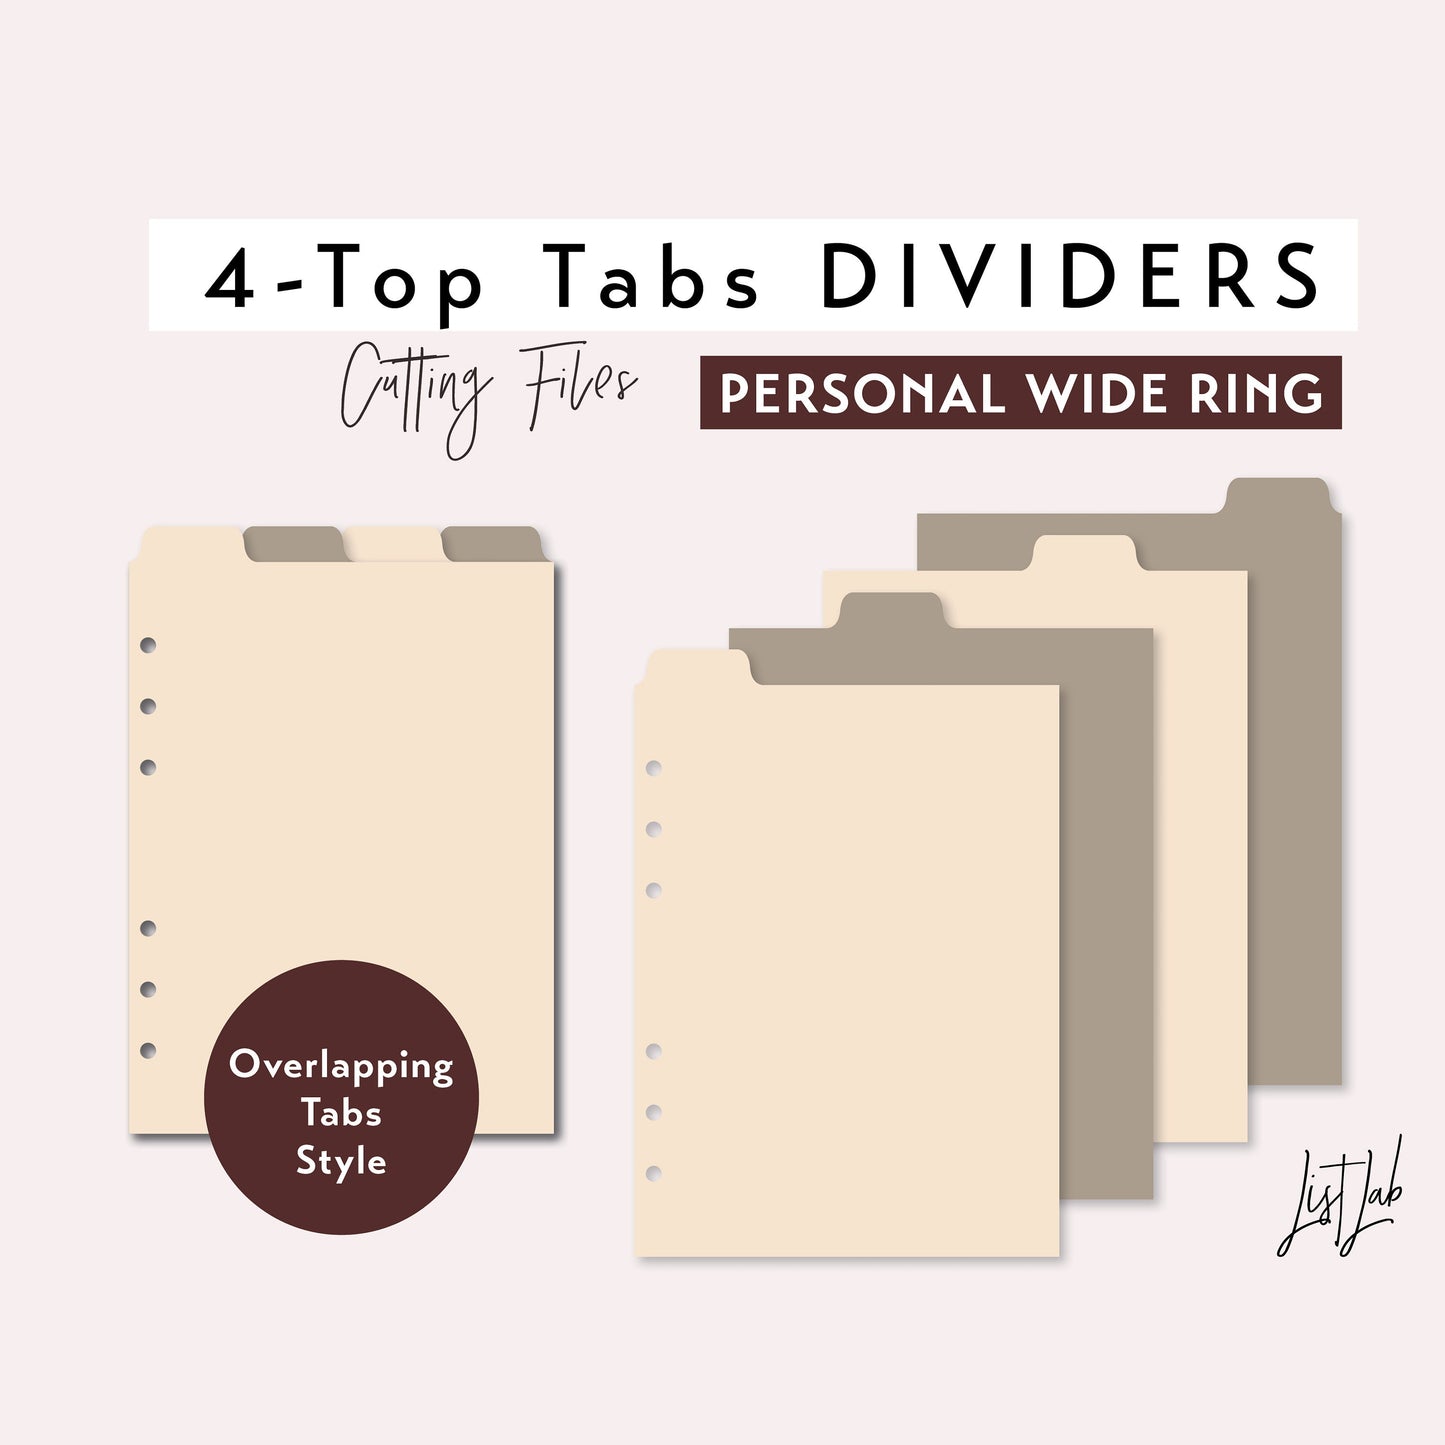 Personal WIDE Ring size 4-TOP Tab Dividers Cutting Files Set